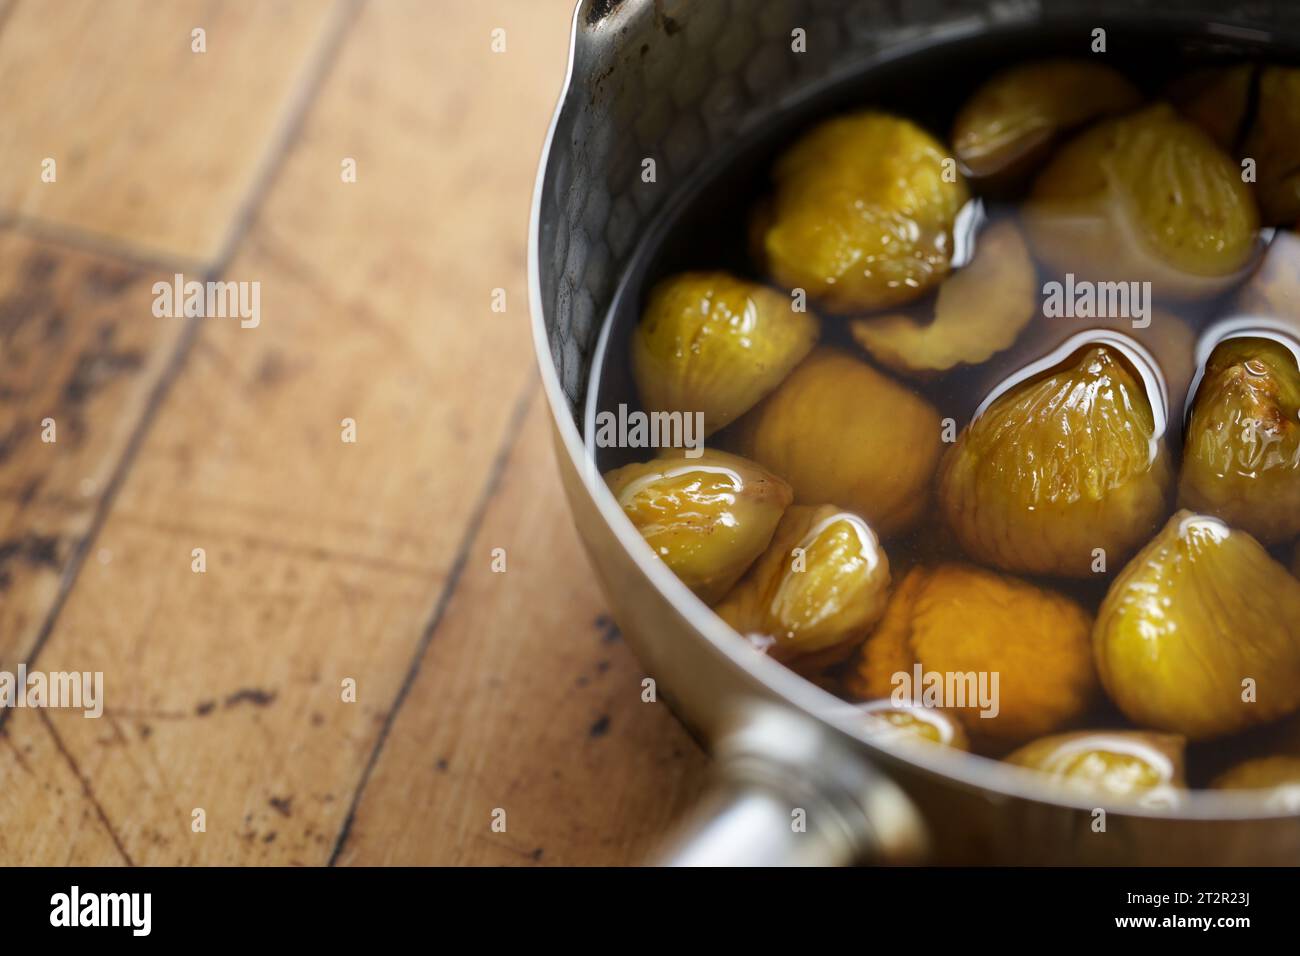 Making Candied chestnuts. Japanese cuisine Stock Photo